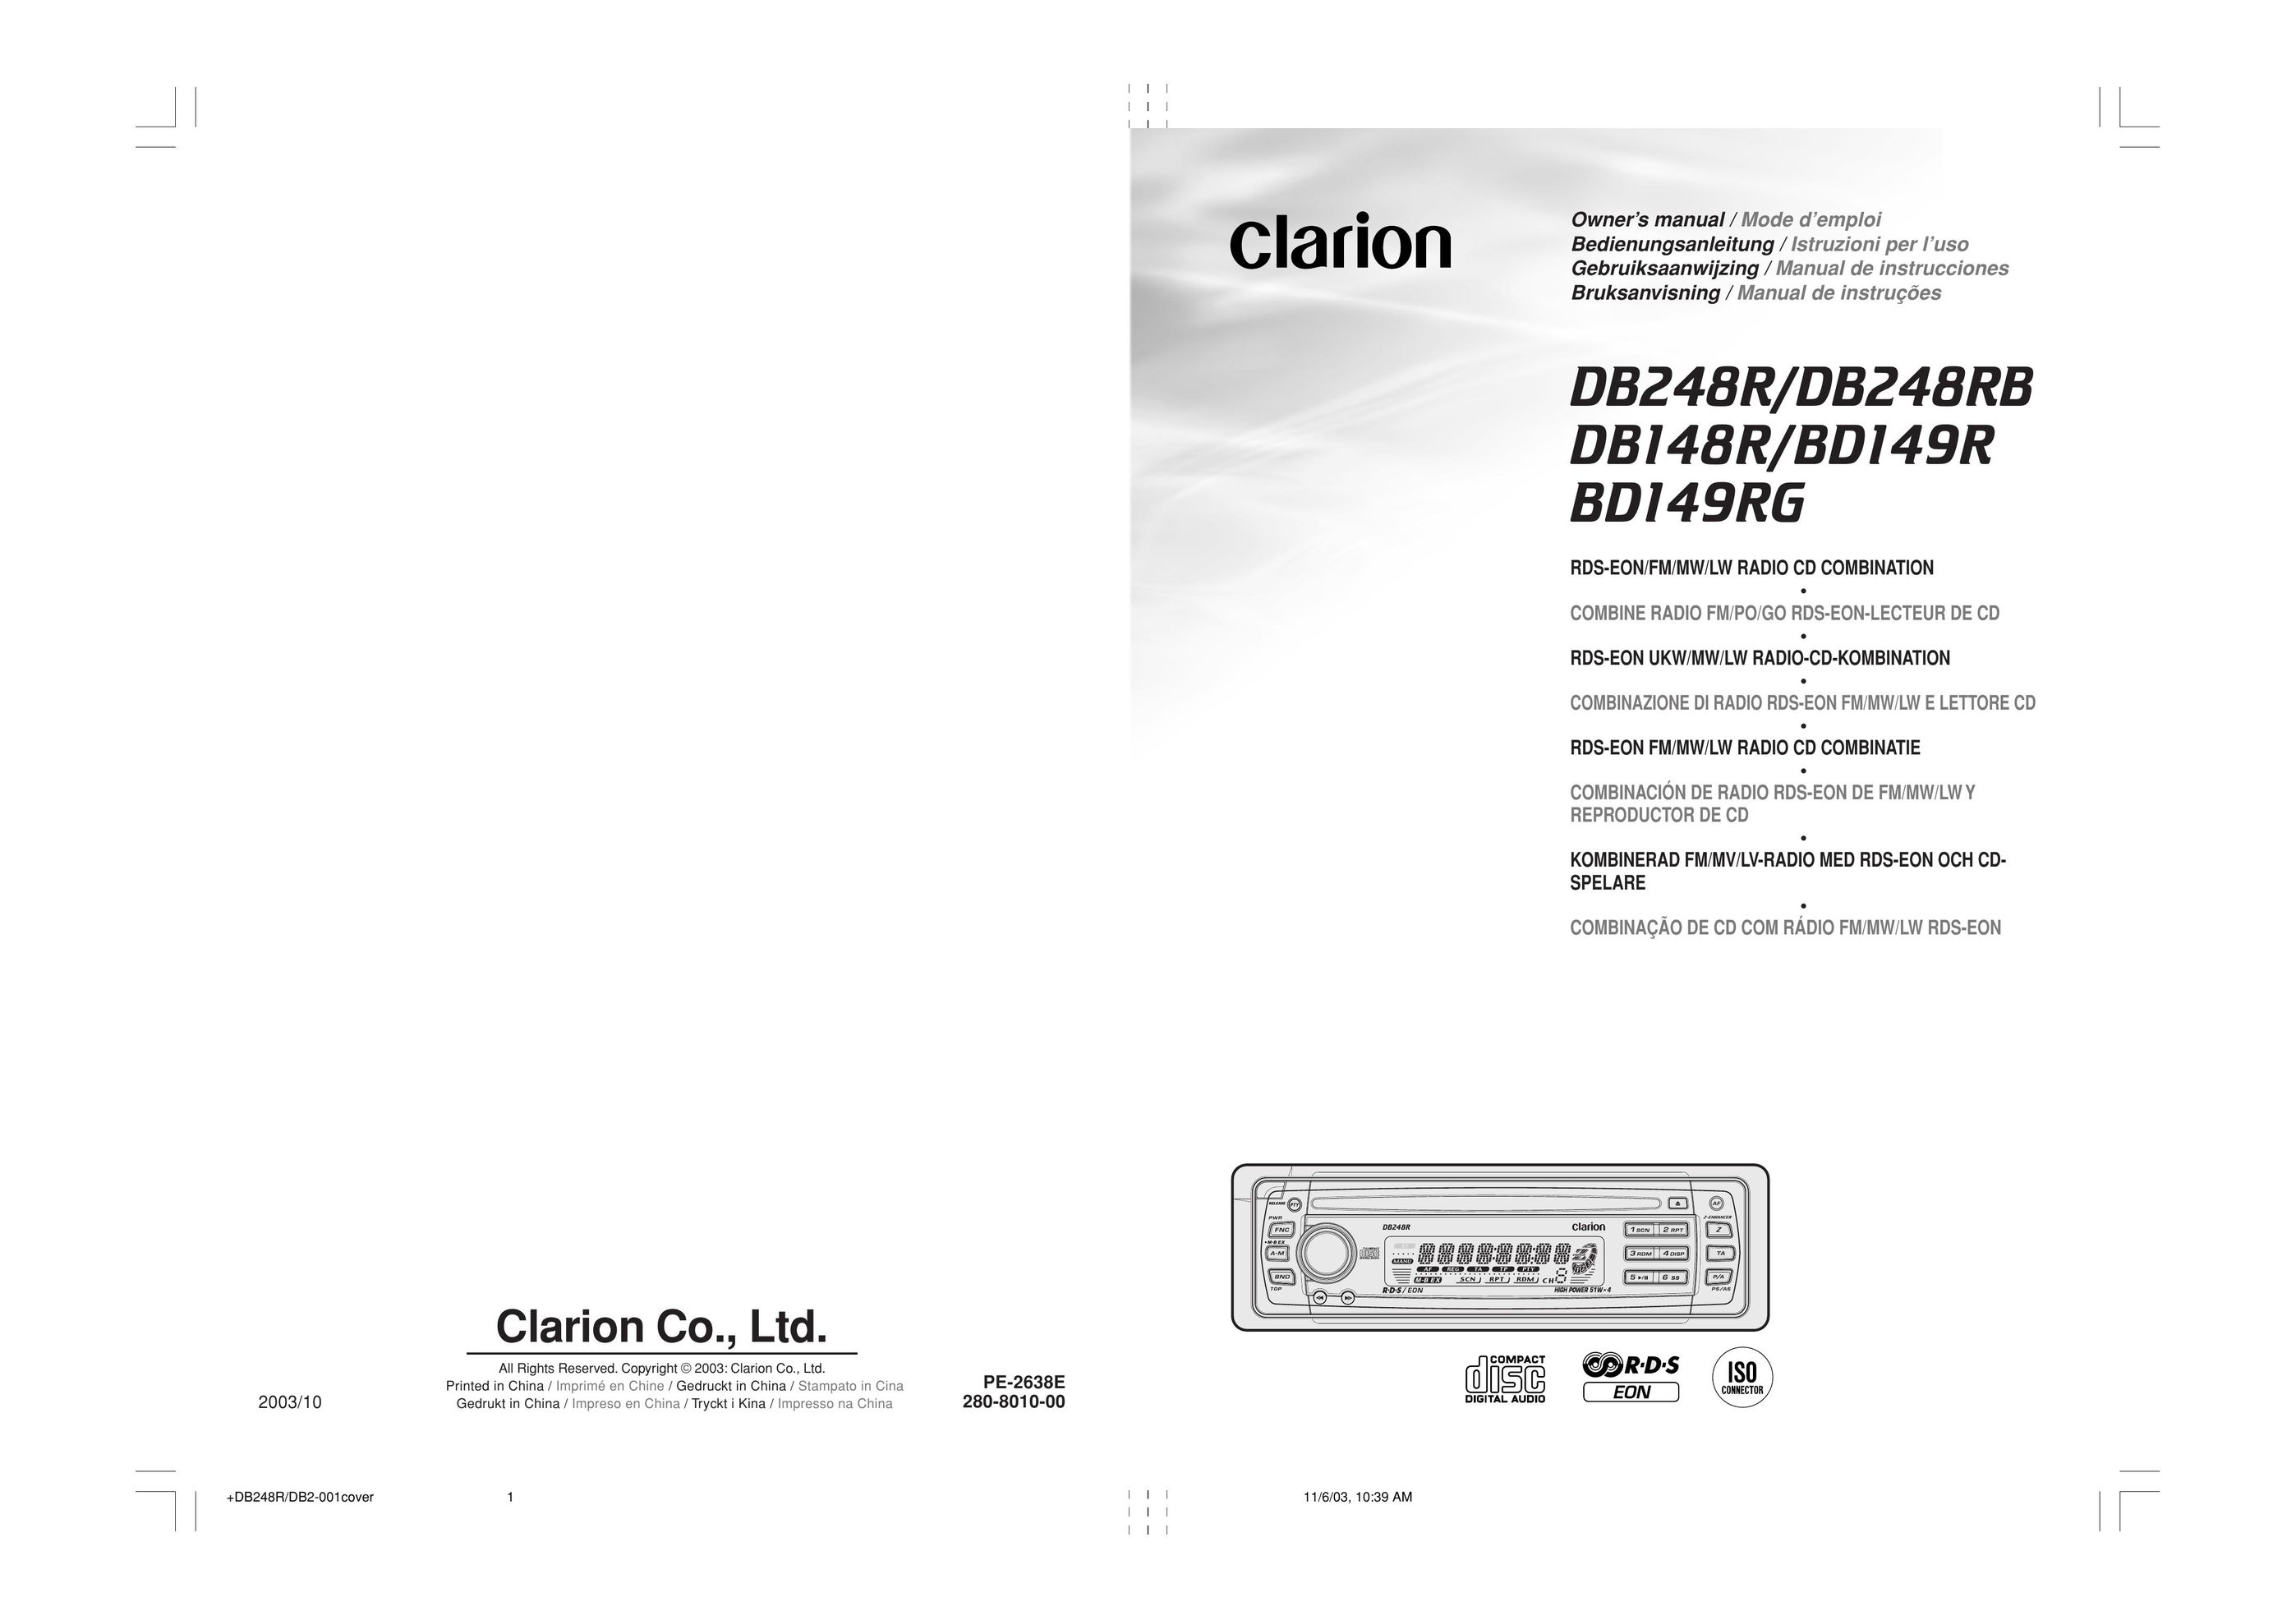 Clarion BD149RG Car Stereo System User Manual